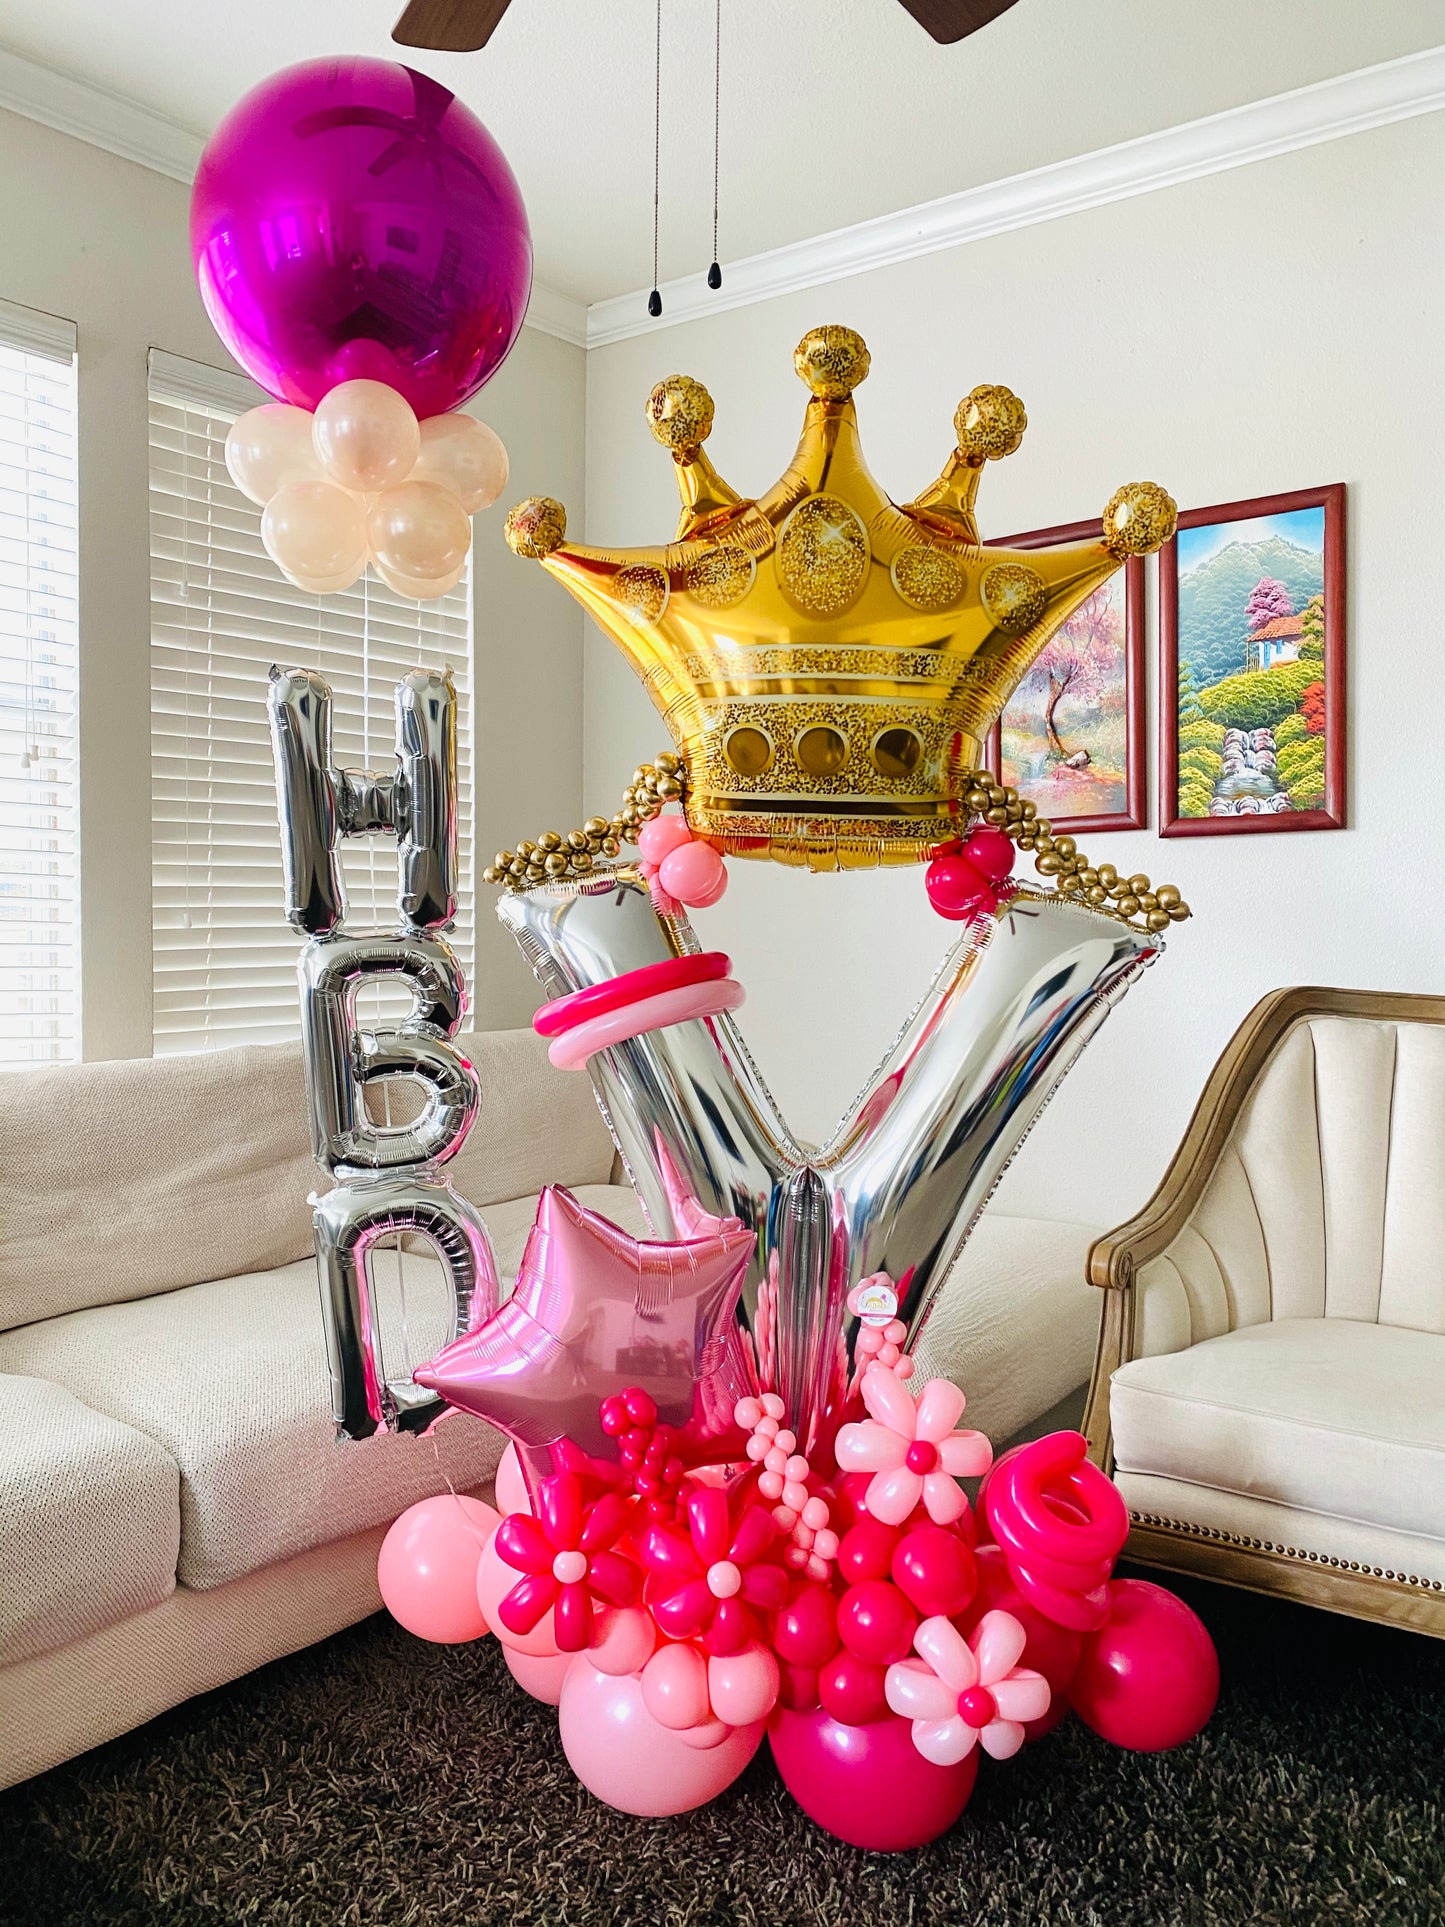 Balloons Bouquet initial (click to see more photos)